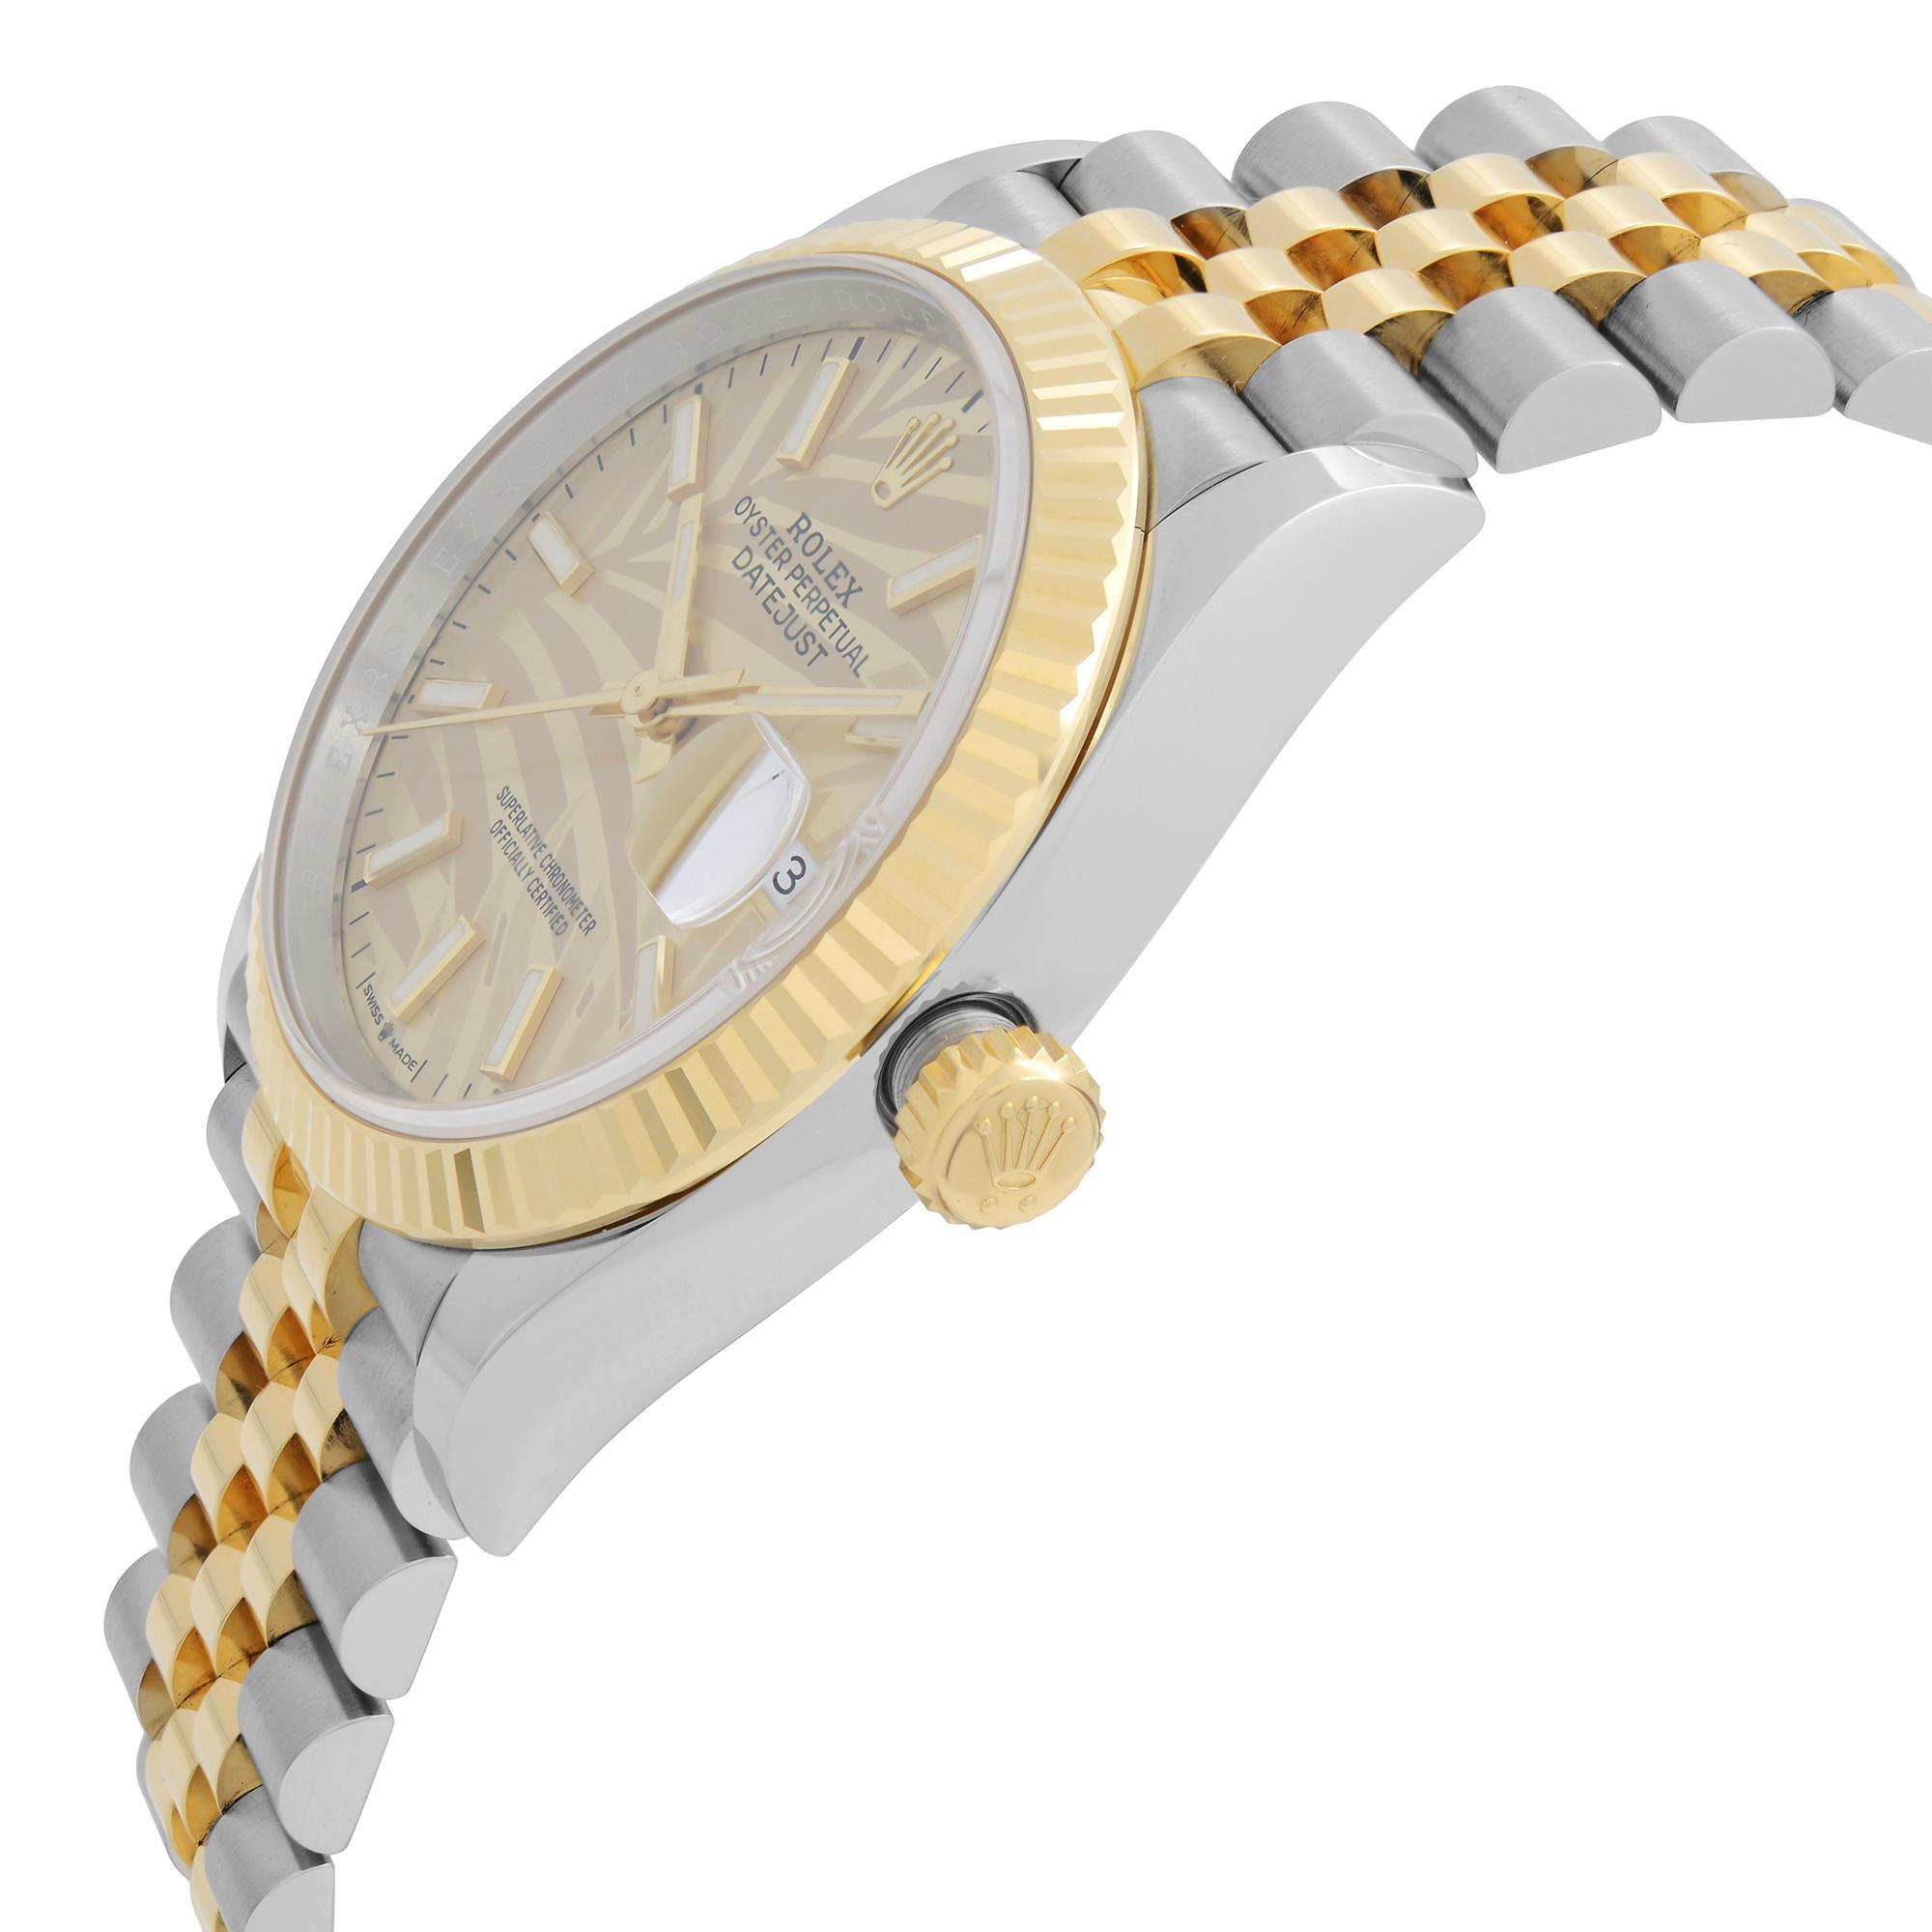 NEW Rolex Datejust 18K Yellow Gold Steel Champagne Motif Dial Watch 126333 For Sale 1